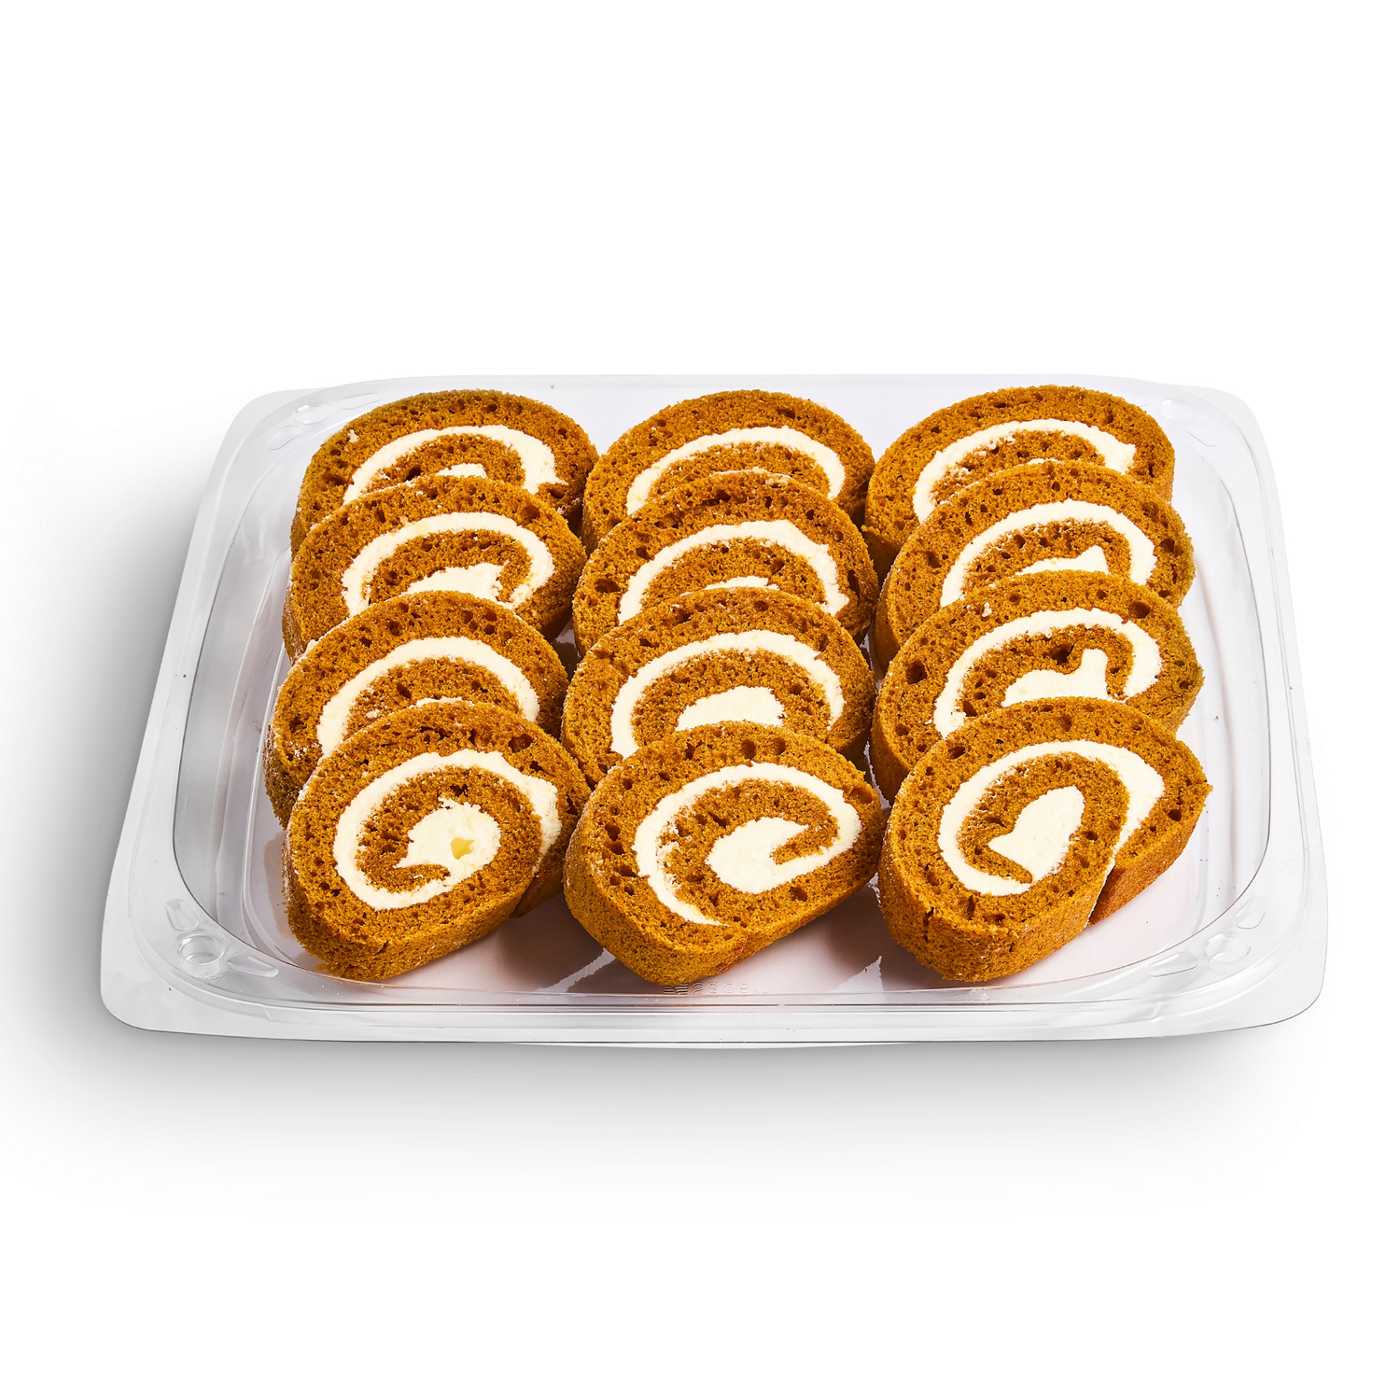 H-E-B Bakery Party Tray - Pumpkin Cake Rolls; image 1 of 3